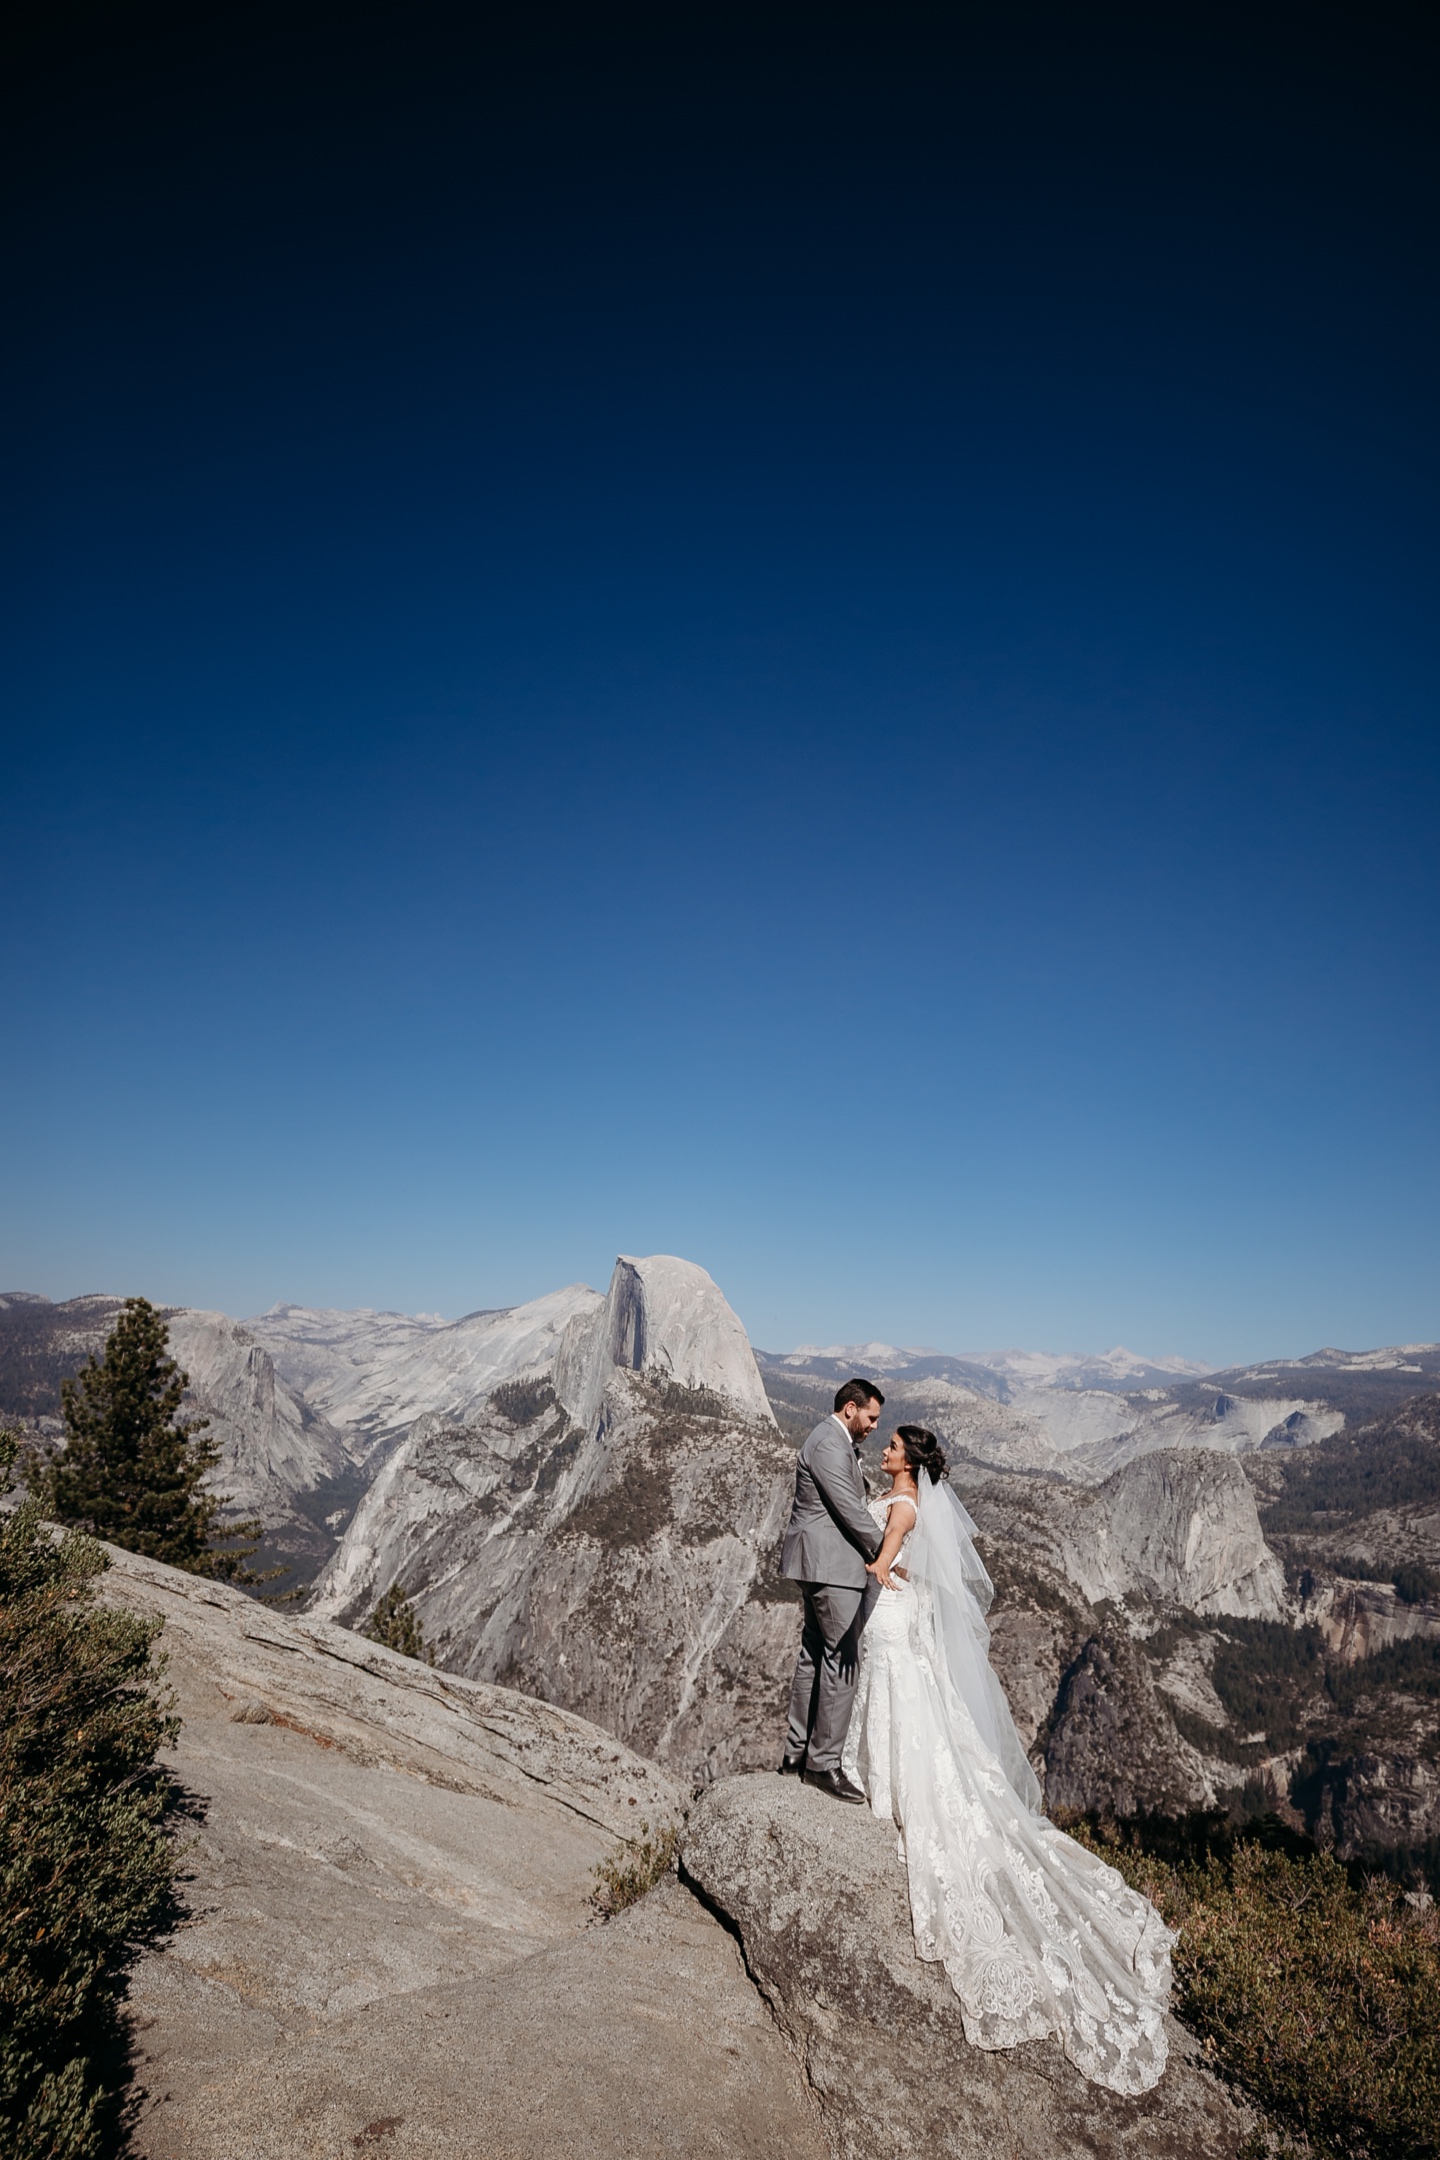 Dramatic image of bride and groom embracing each other with Half Dome and Yosemite National Park in the background.